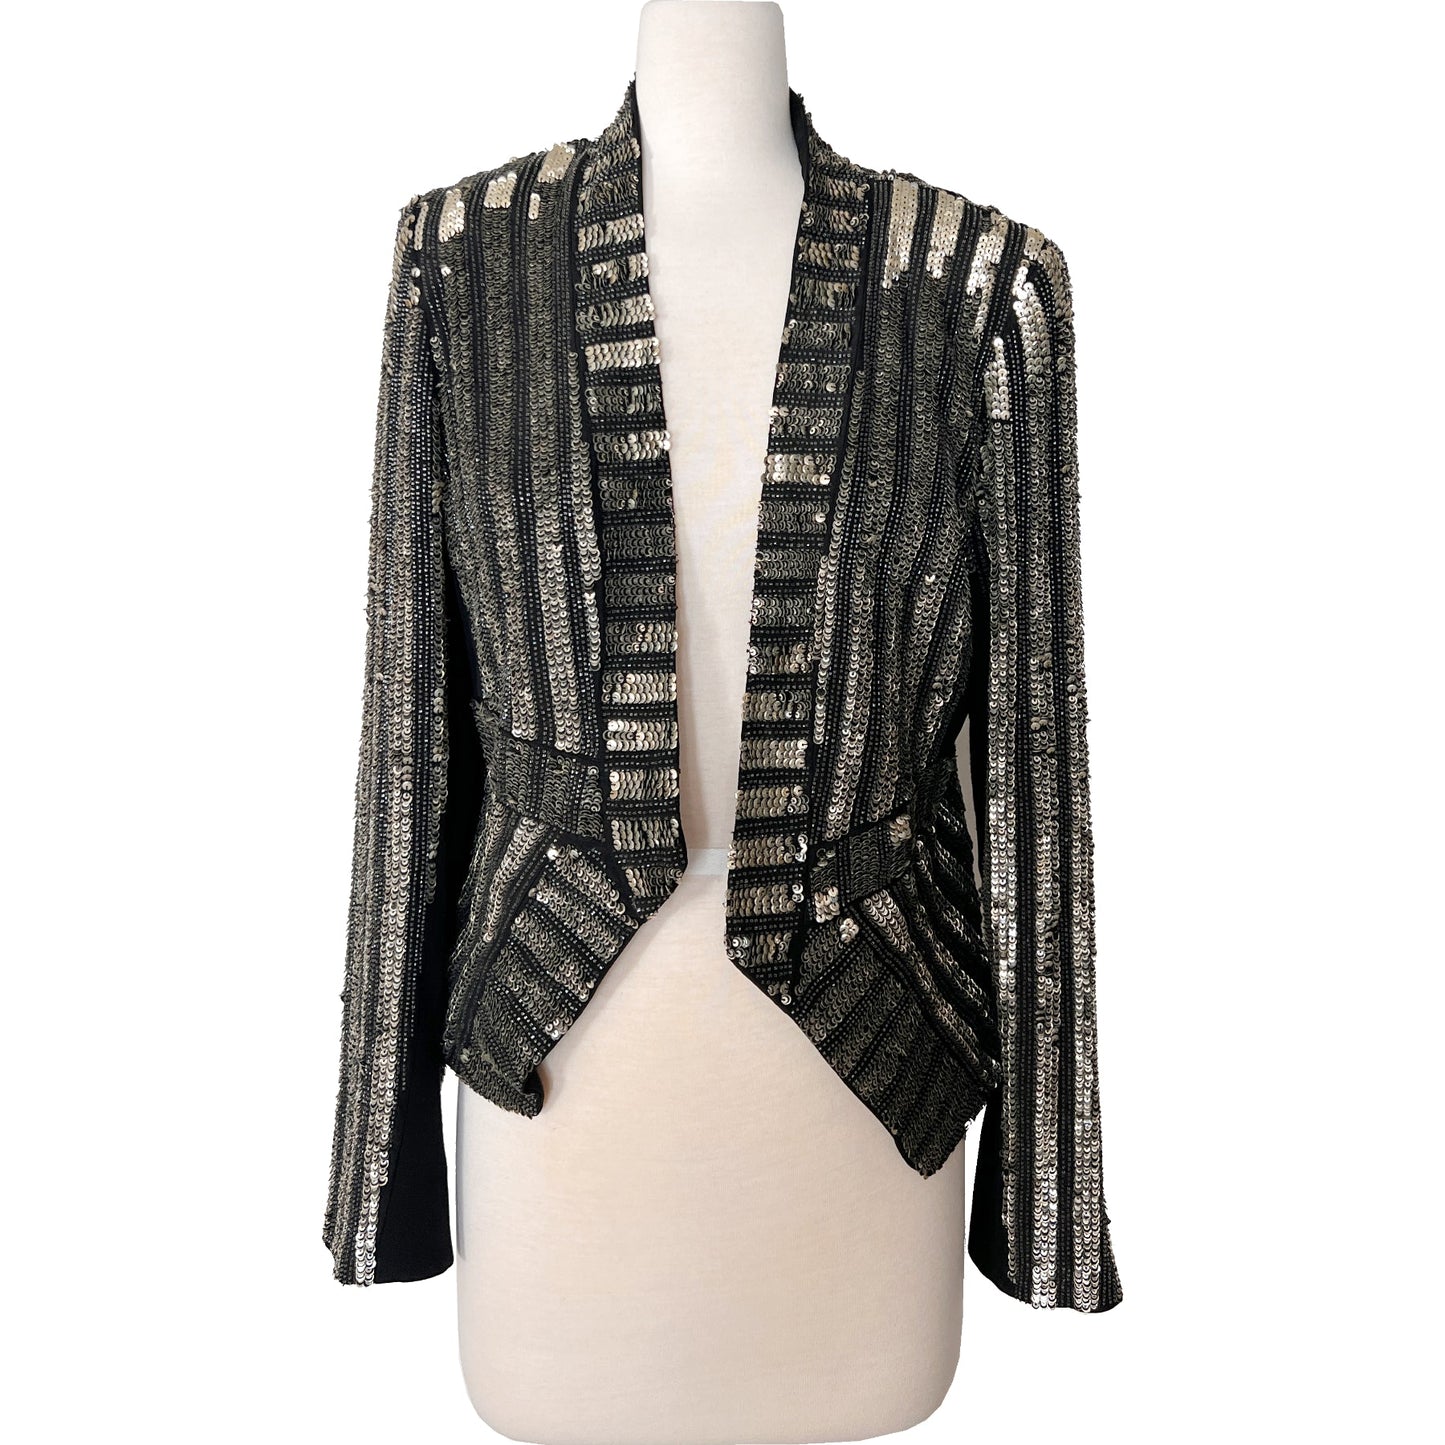 J. Mendel Paris Couture Silver Sequin Cropped Embroidered Evening Jacket Blazer